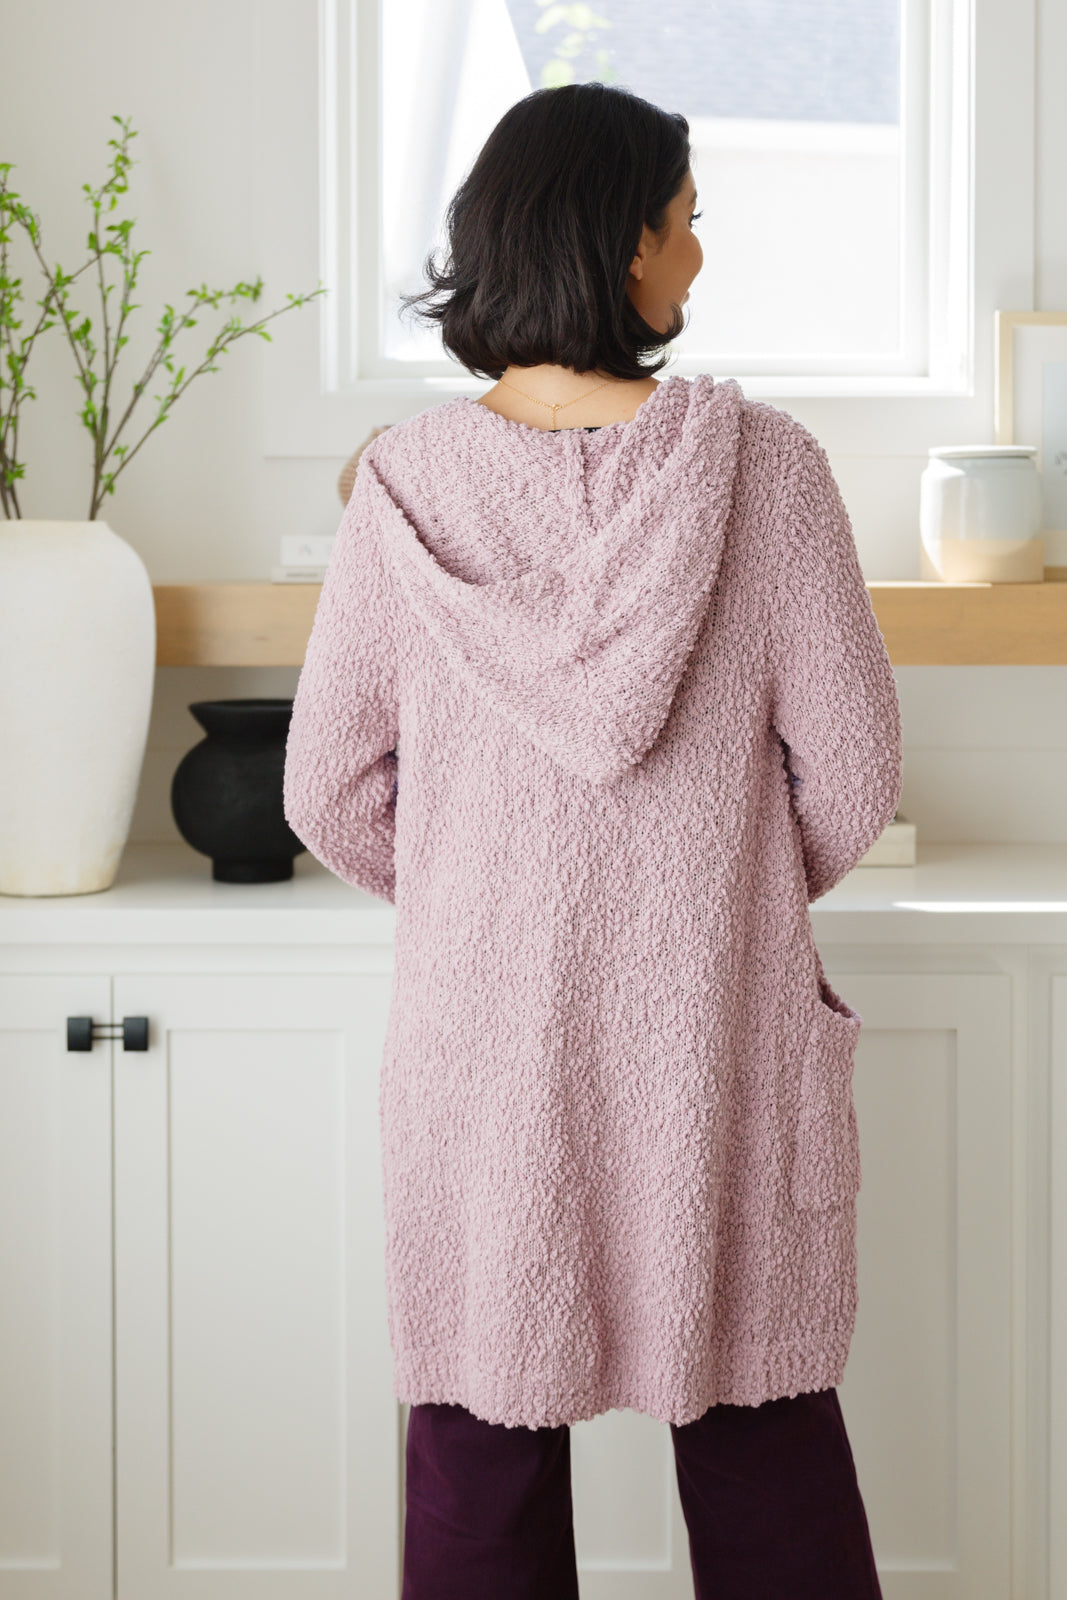 Crafted from a soft and luxurious boucle knit, this cardigan features a hooded design, button closure, front pockets, and an oversized fit for a look that's both chic and cozy